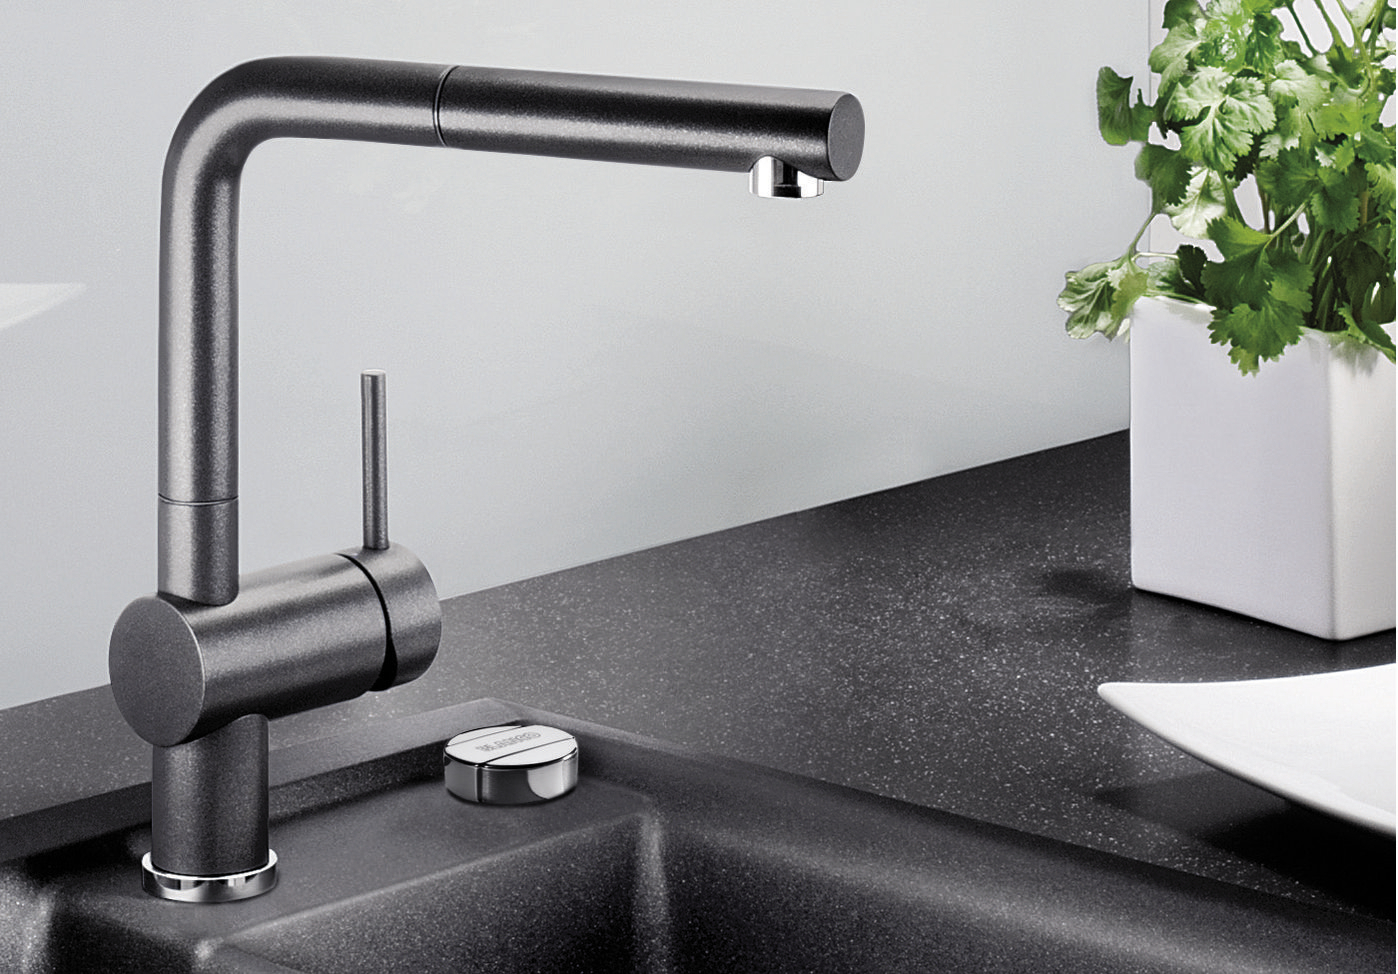 Single-lever mixer taps boast a timeless, minimalist design + high-quality features